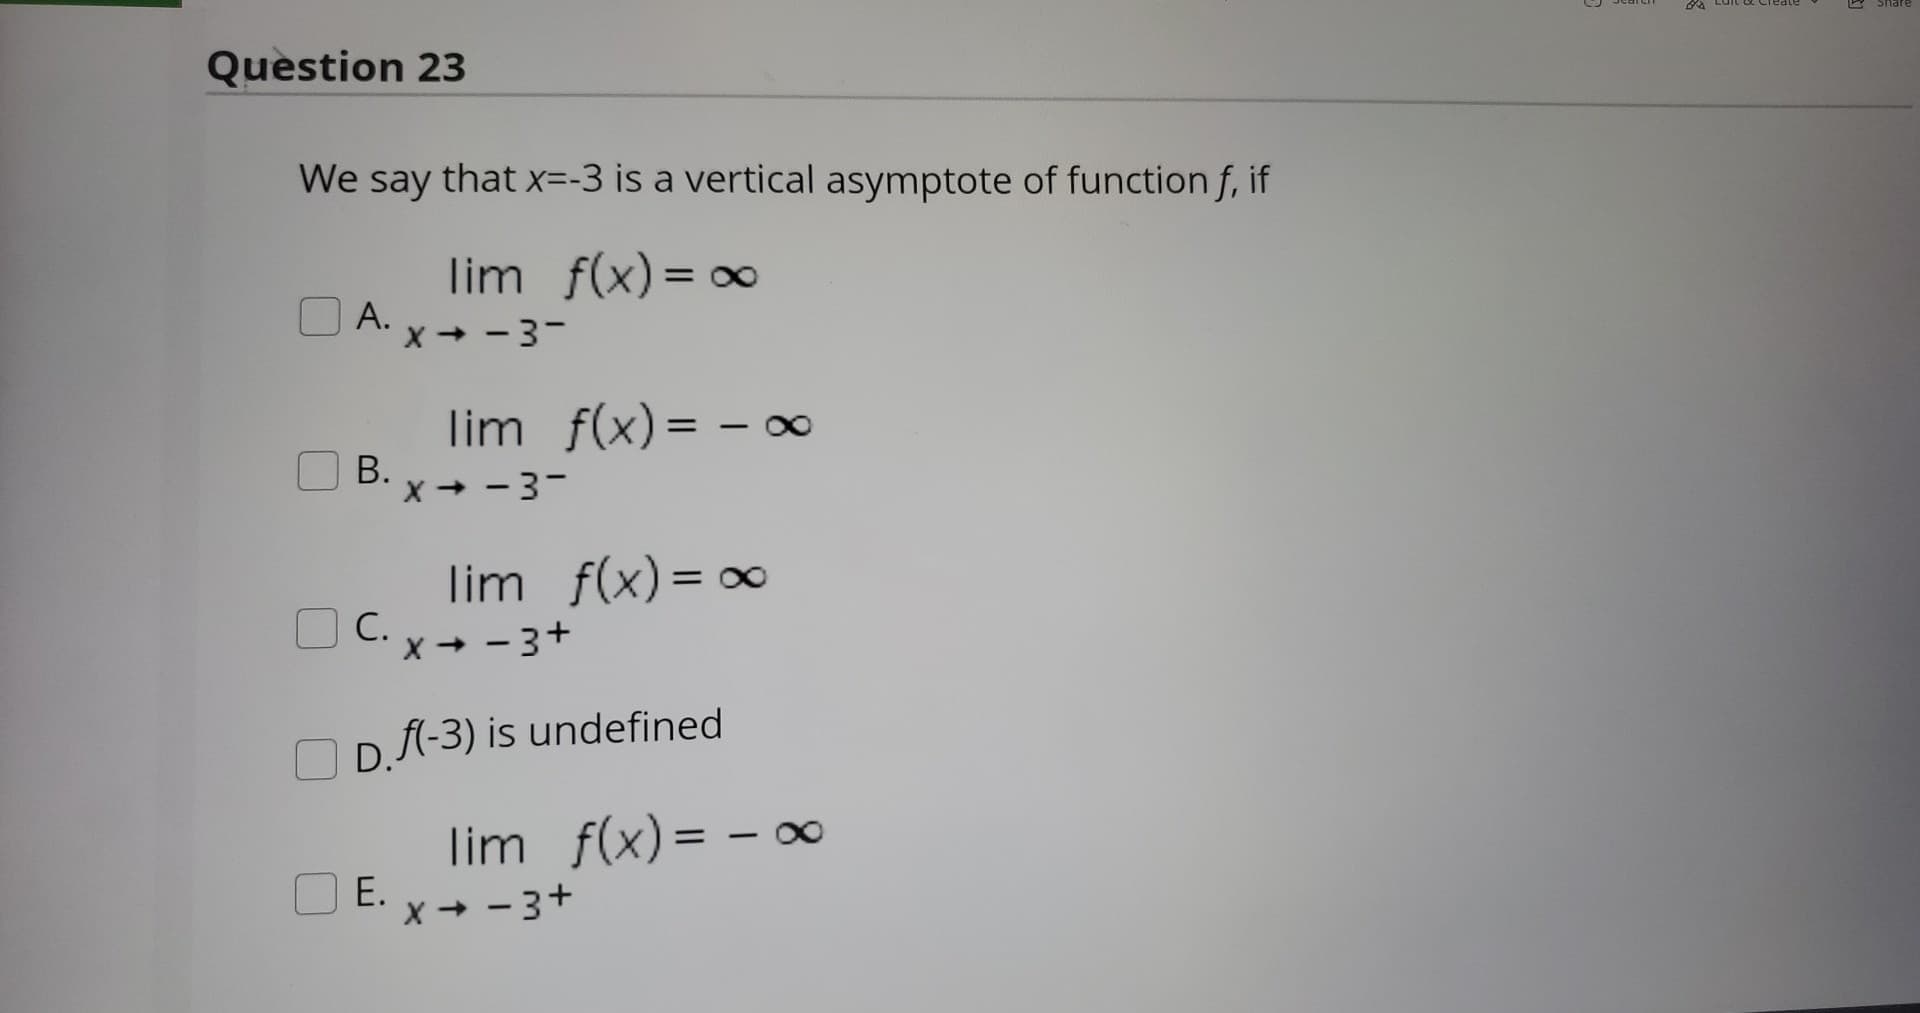 We say that x=-3 is a vertical asymptote of function f, if
lim f(x) = 0
А.
X + - 3-
lim f(x)= -
В.
x + - 3-
lim f(x)= ∞
O C. x- - 3+
С.
D. fl-3) is undefined
lim f(x)= – ∞
E.
X + - 3+
